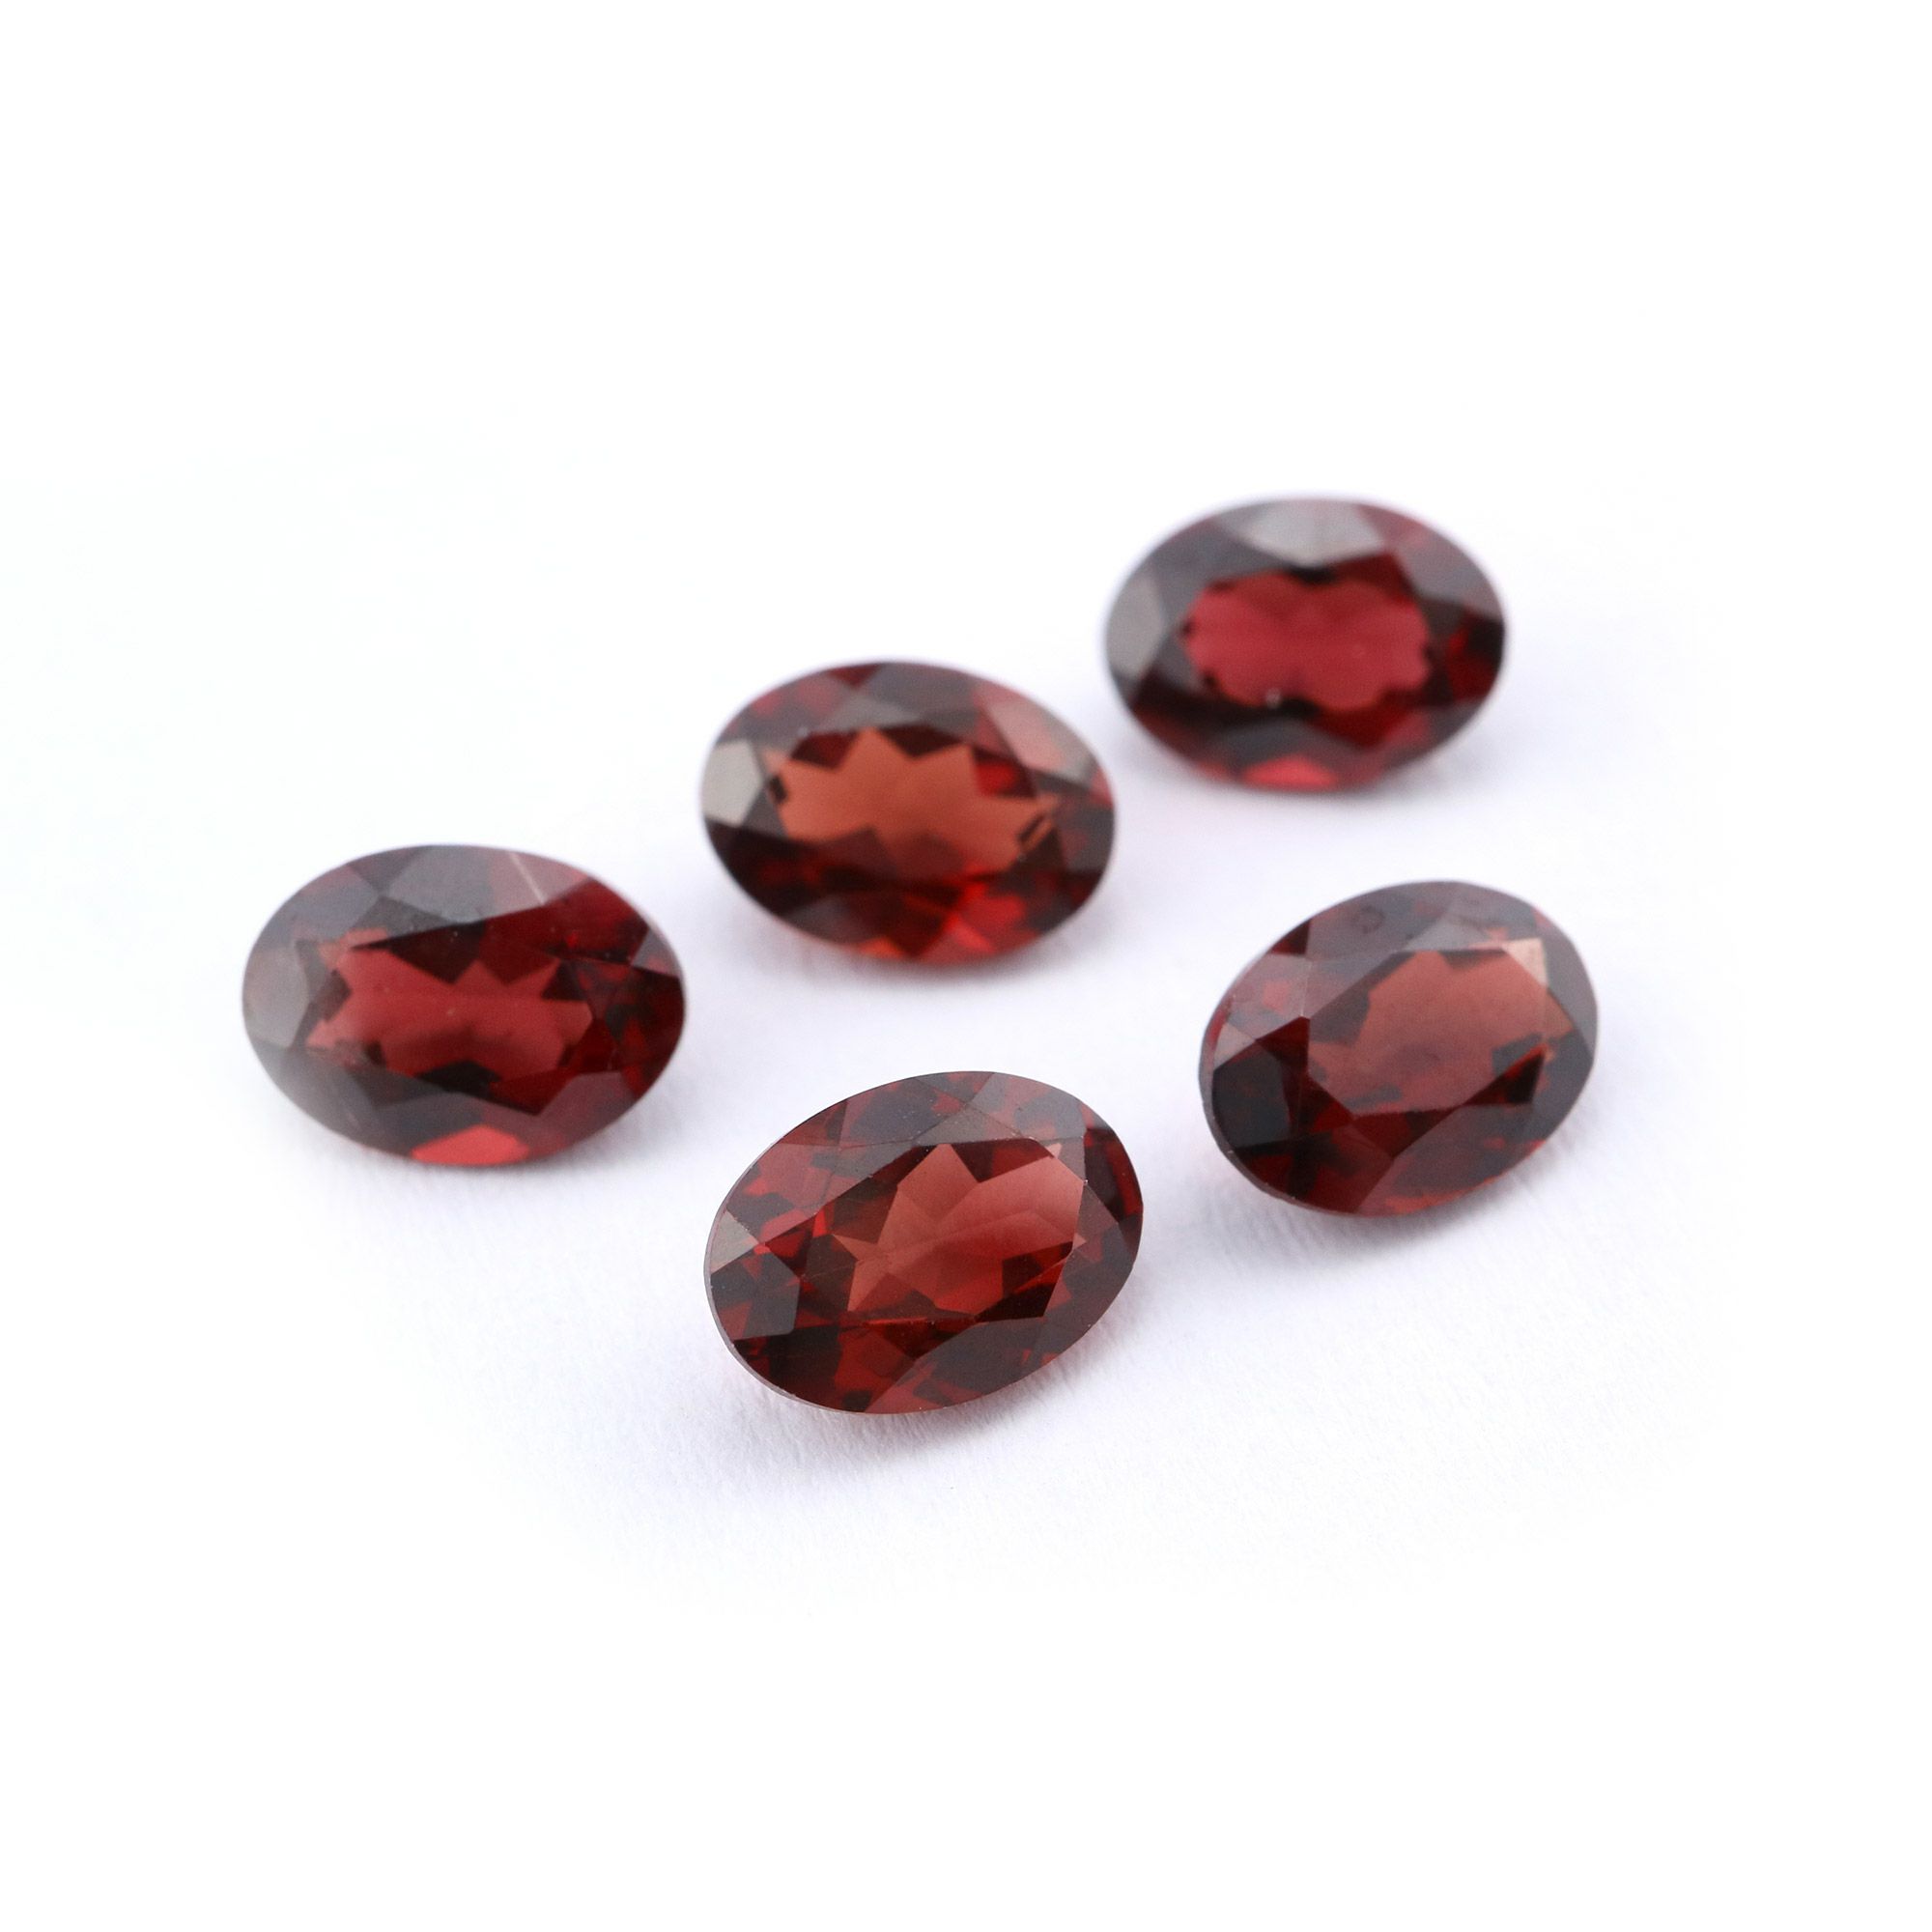 1Pcs Oval Red Garnet January Birthstone Faceted Cut Loose Gemstone Natural Semi Precious Stone DIY Jewelry Supplies 4120124 - Click Image to Close